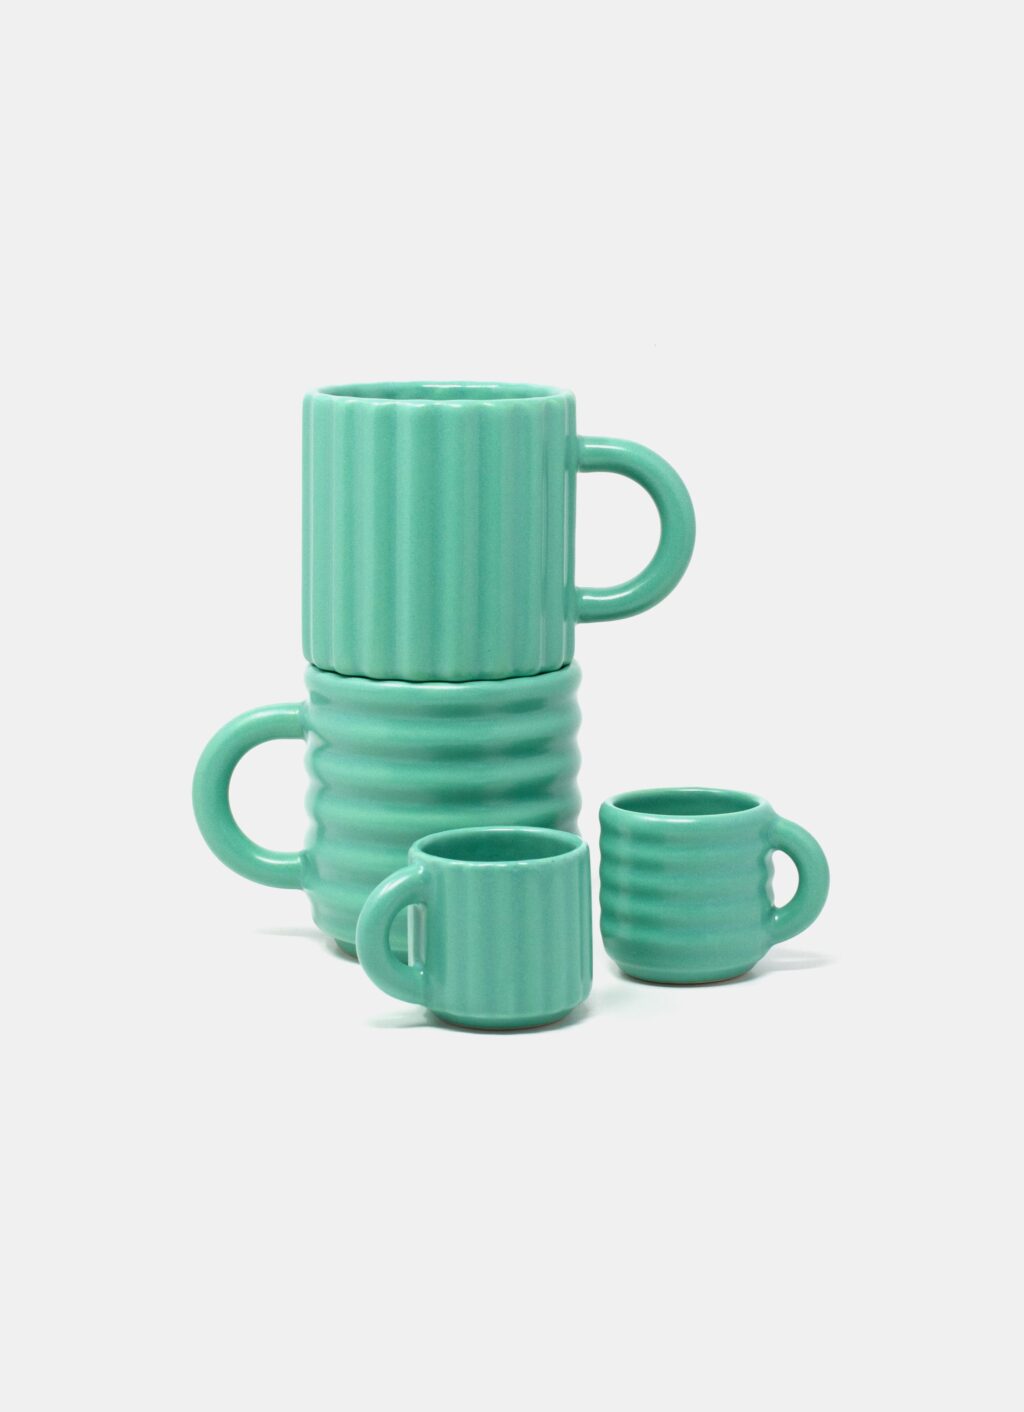 Form and Seek - Ripple Espresso Cups - Set of Two - Emerald